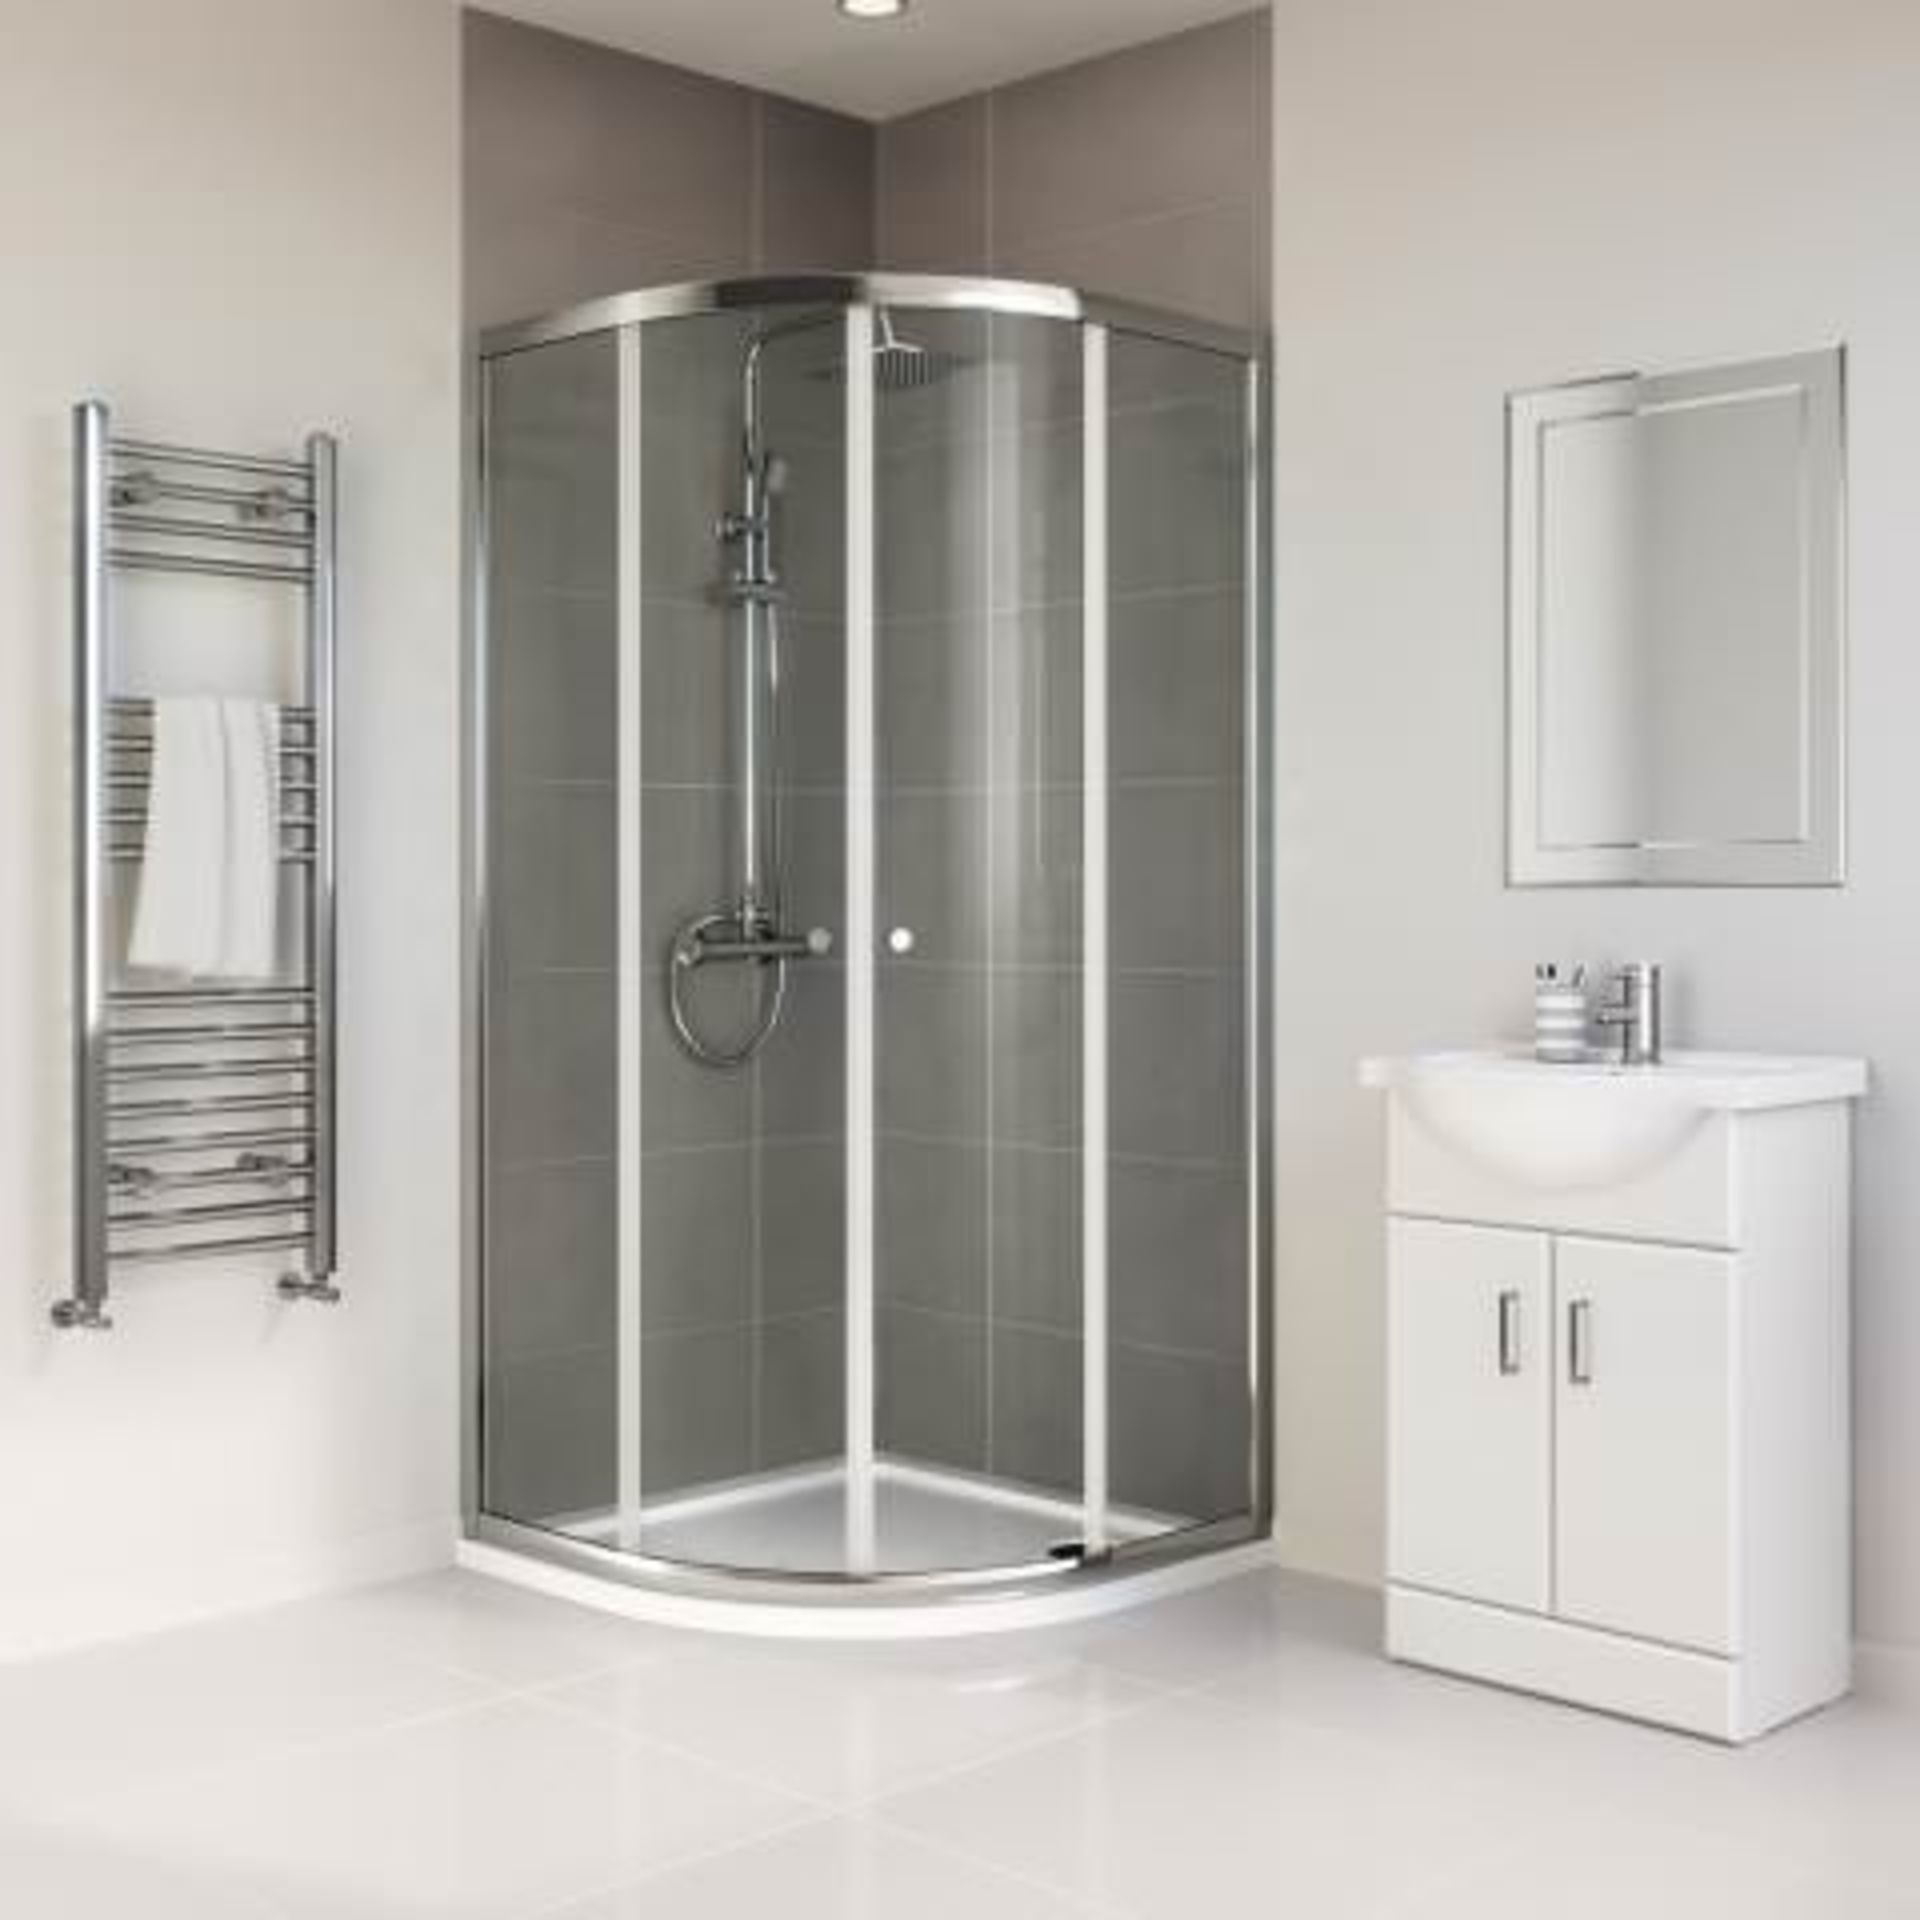 NEW (NS102) 900x900mm - Elements Quadrant Shower Enclosure. RRP £429.99. Budget Solution Our e... - Image 2 of 3